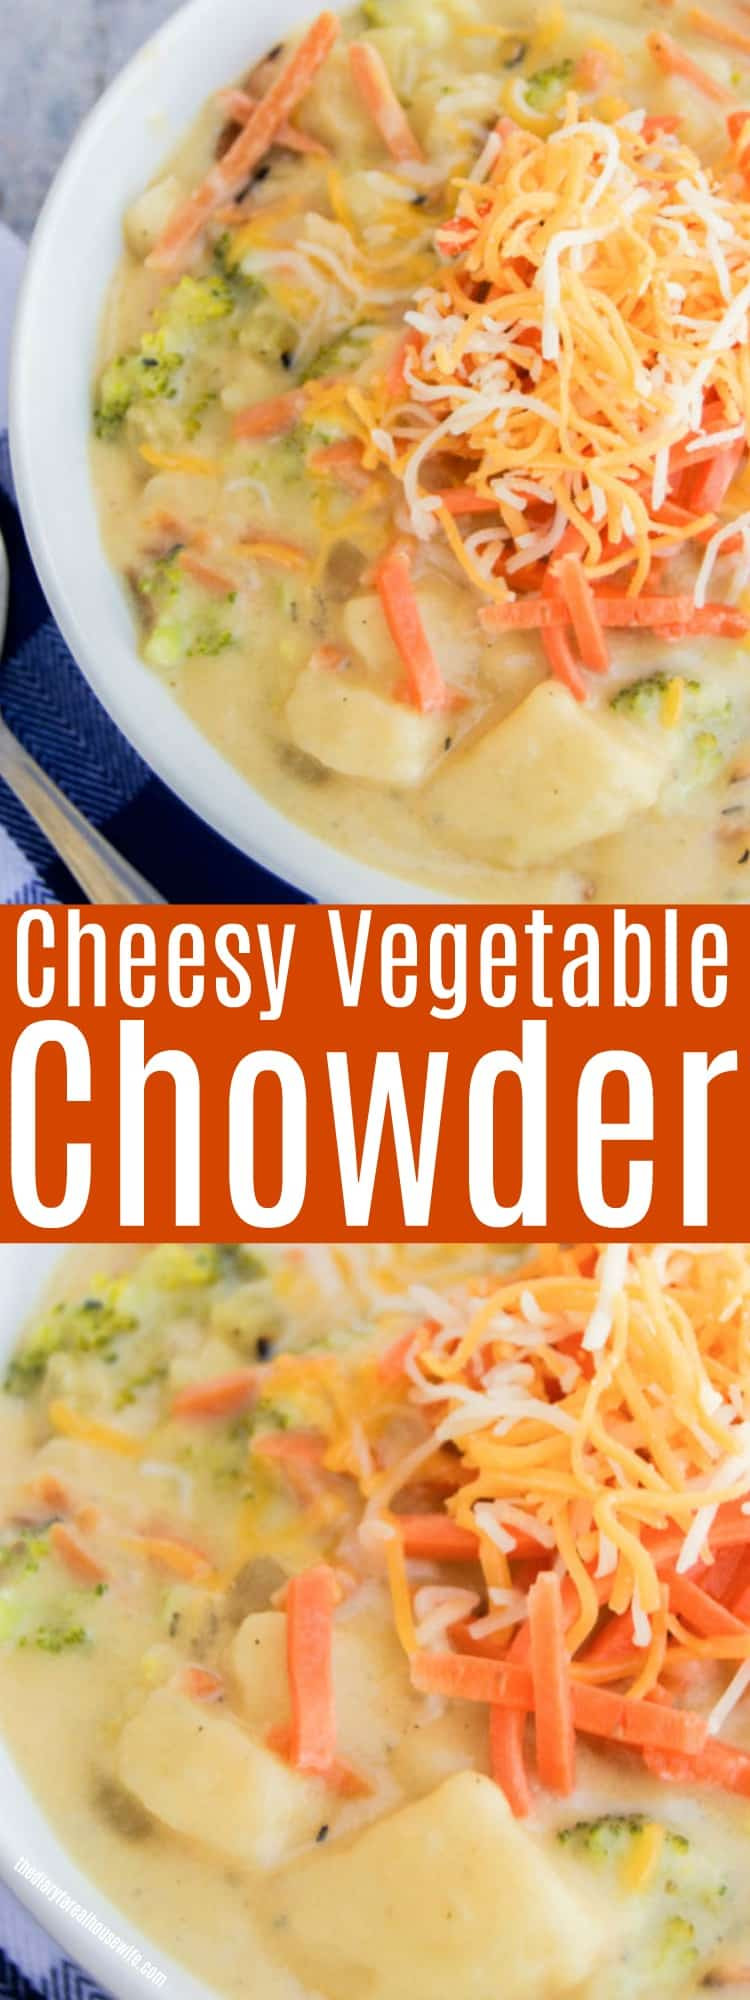 Cheesy Vegetable Chowder
 Cheesy Ve able Chowder The Diary of a Real Housewife